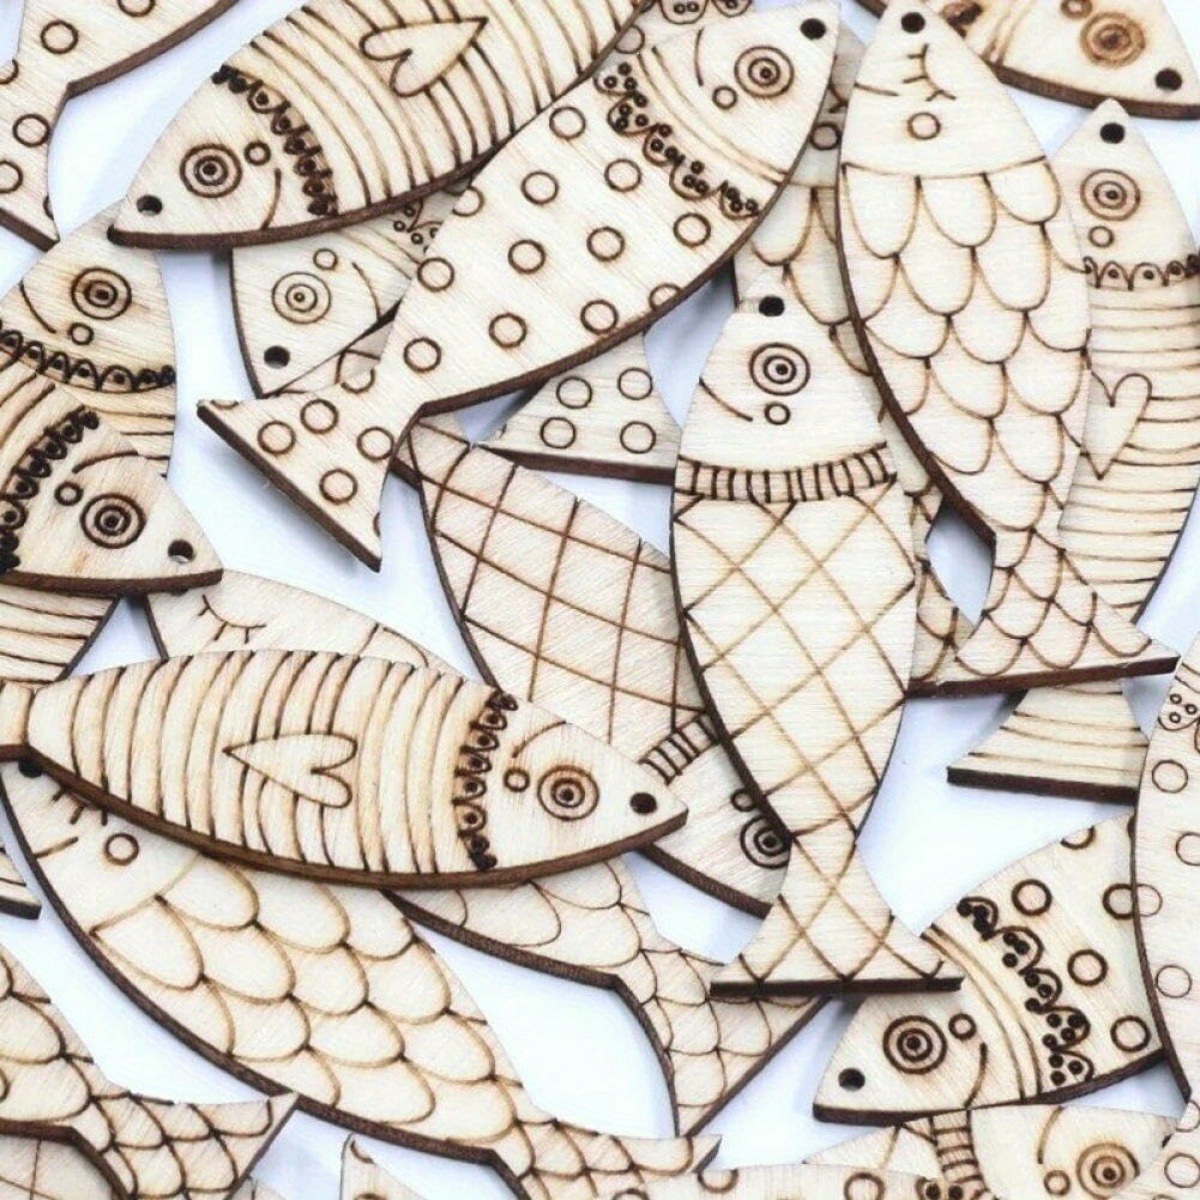 

50pcs Unfinished Wooden Fish Cutouts - Natural Wood Slices For Crafts, Diy Painting, Solid Fish Shapes, Sea Themed Wood Tags For Decorations And Projects